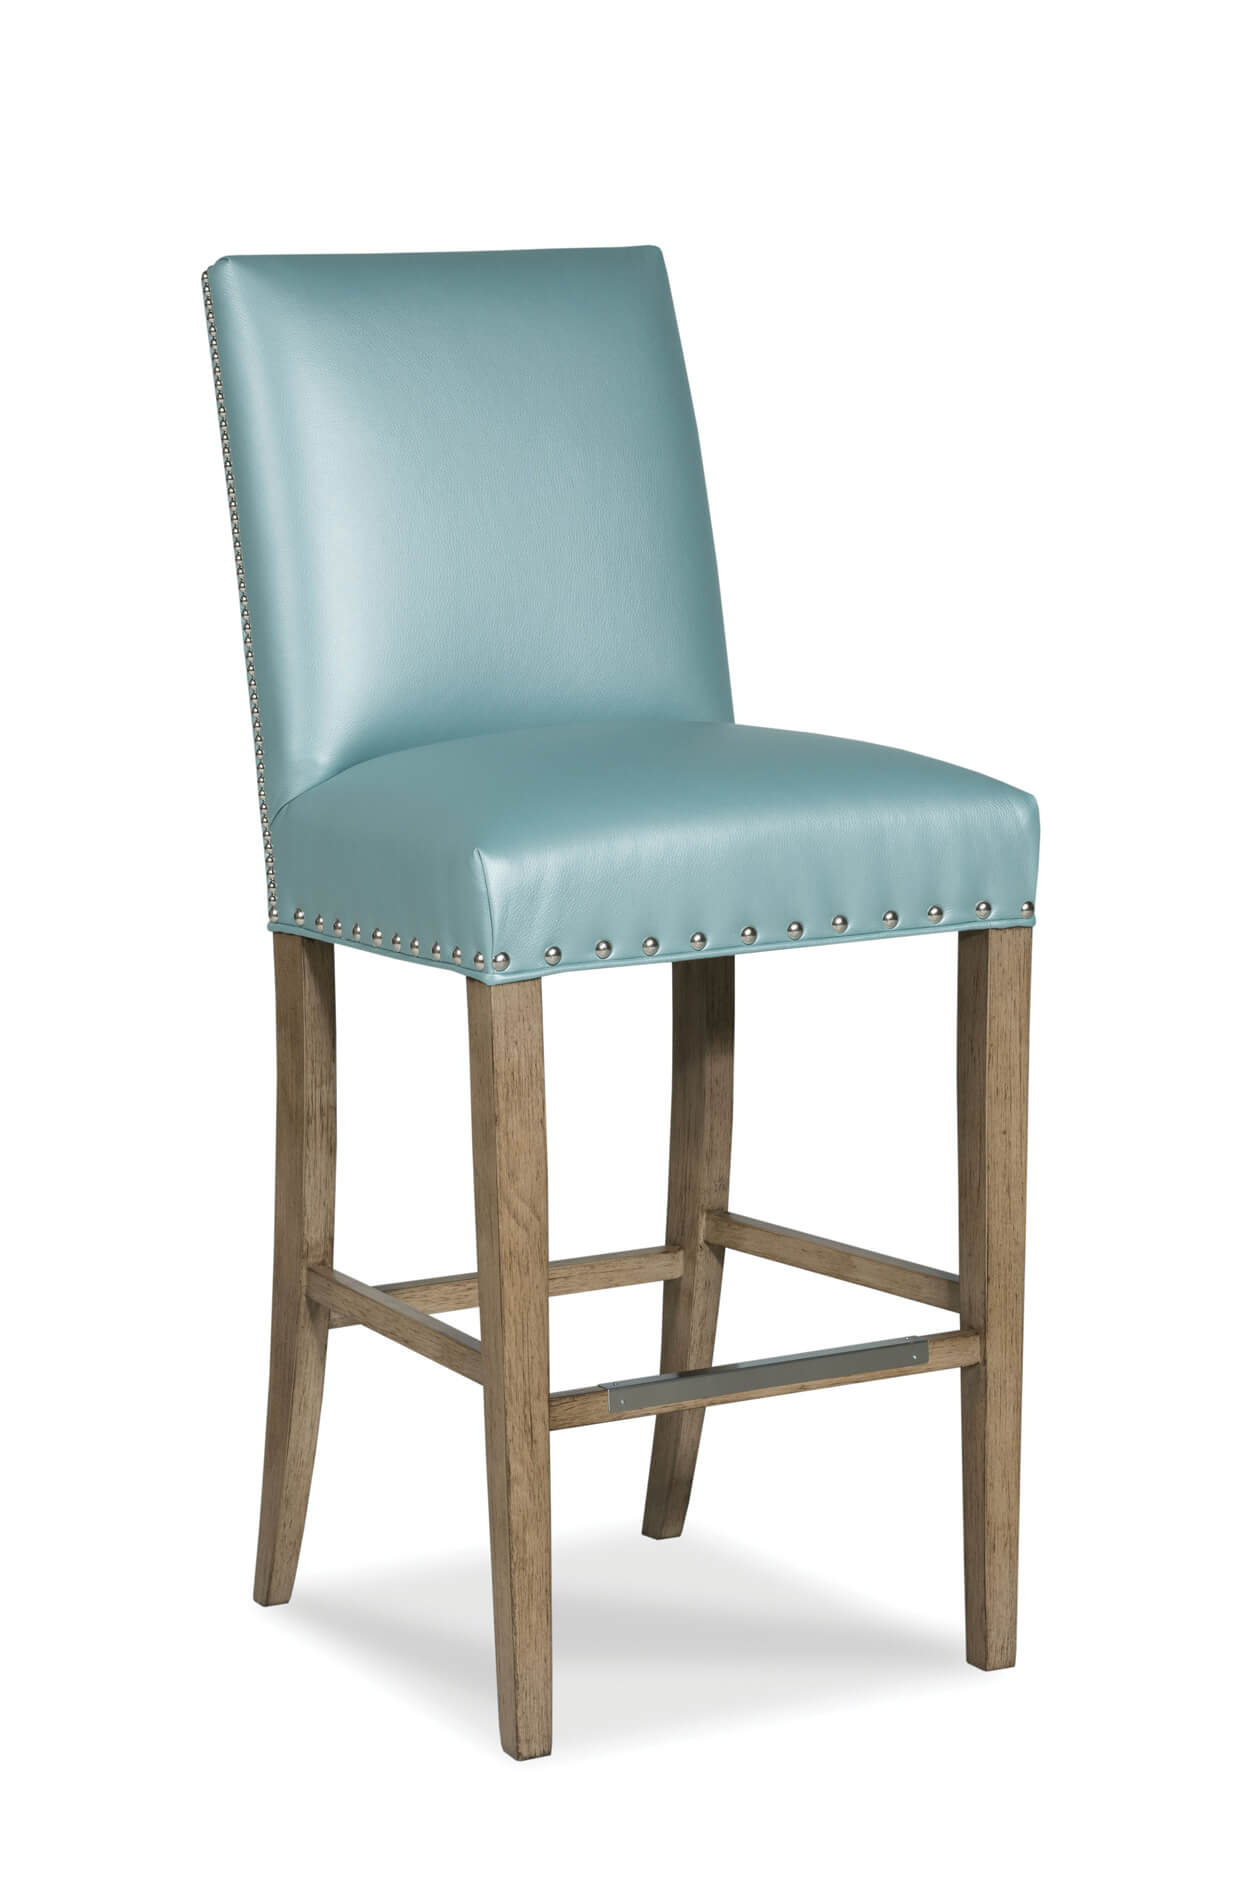 Fairfield S Evans Upholstered Wood, Teal Leather Bar Chairs